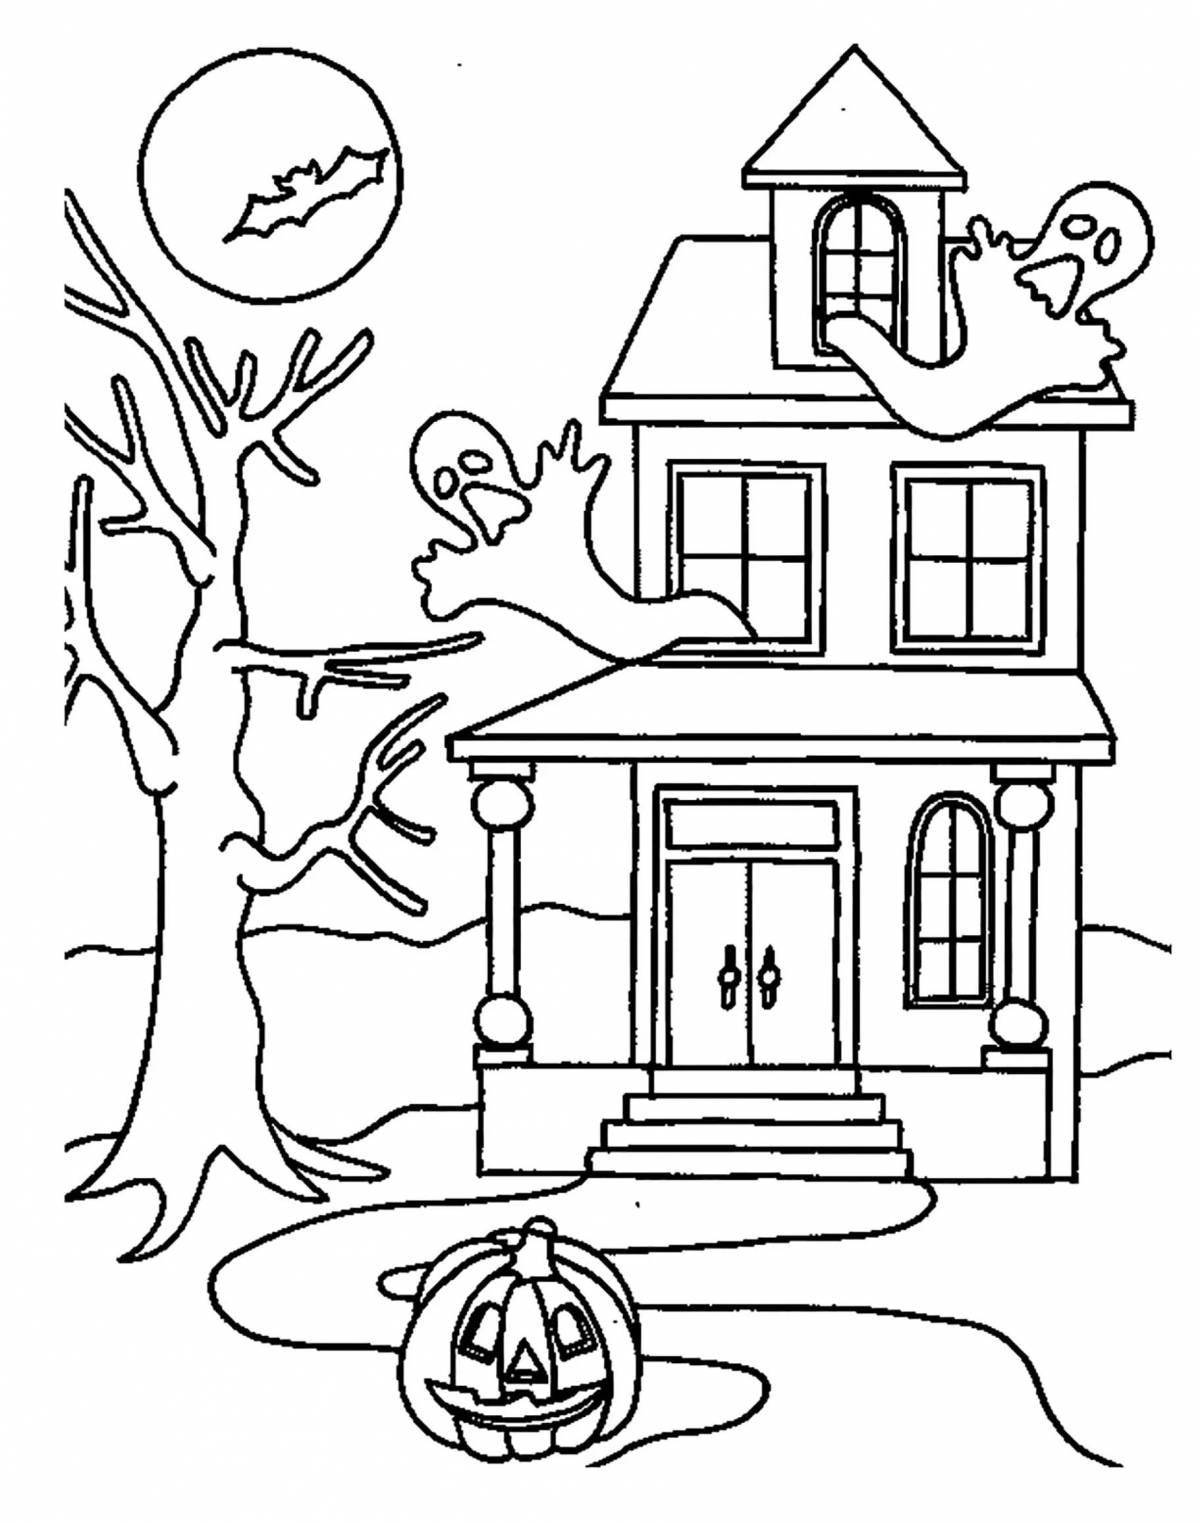 Disturbing sinister house coloring page